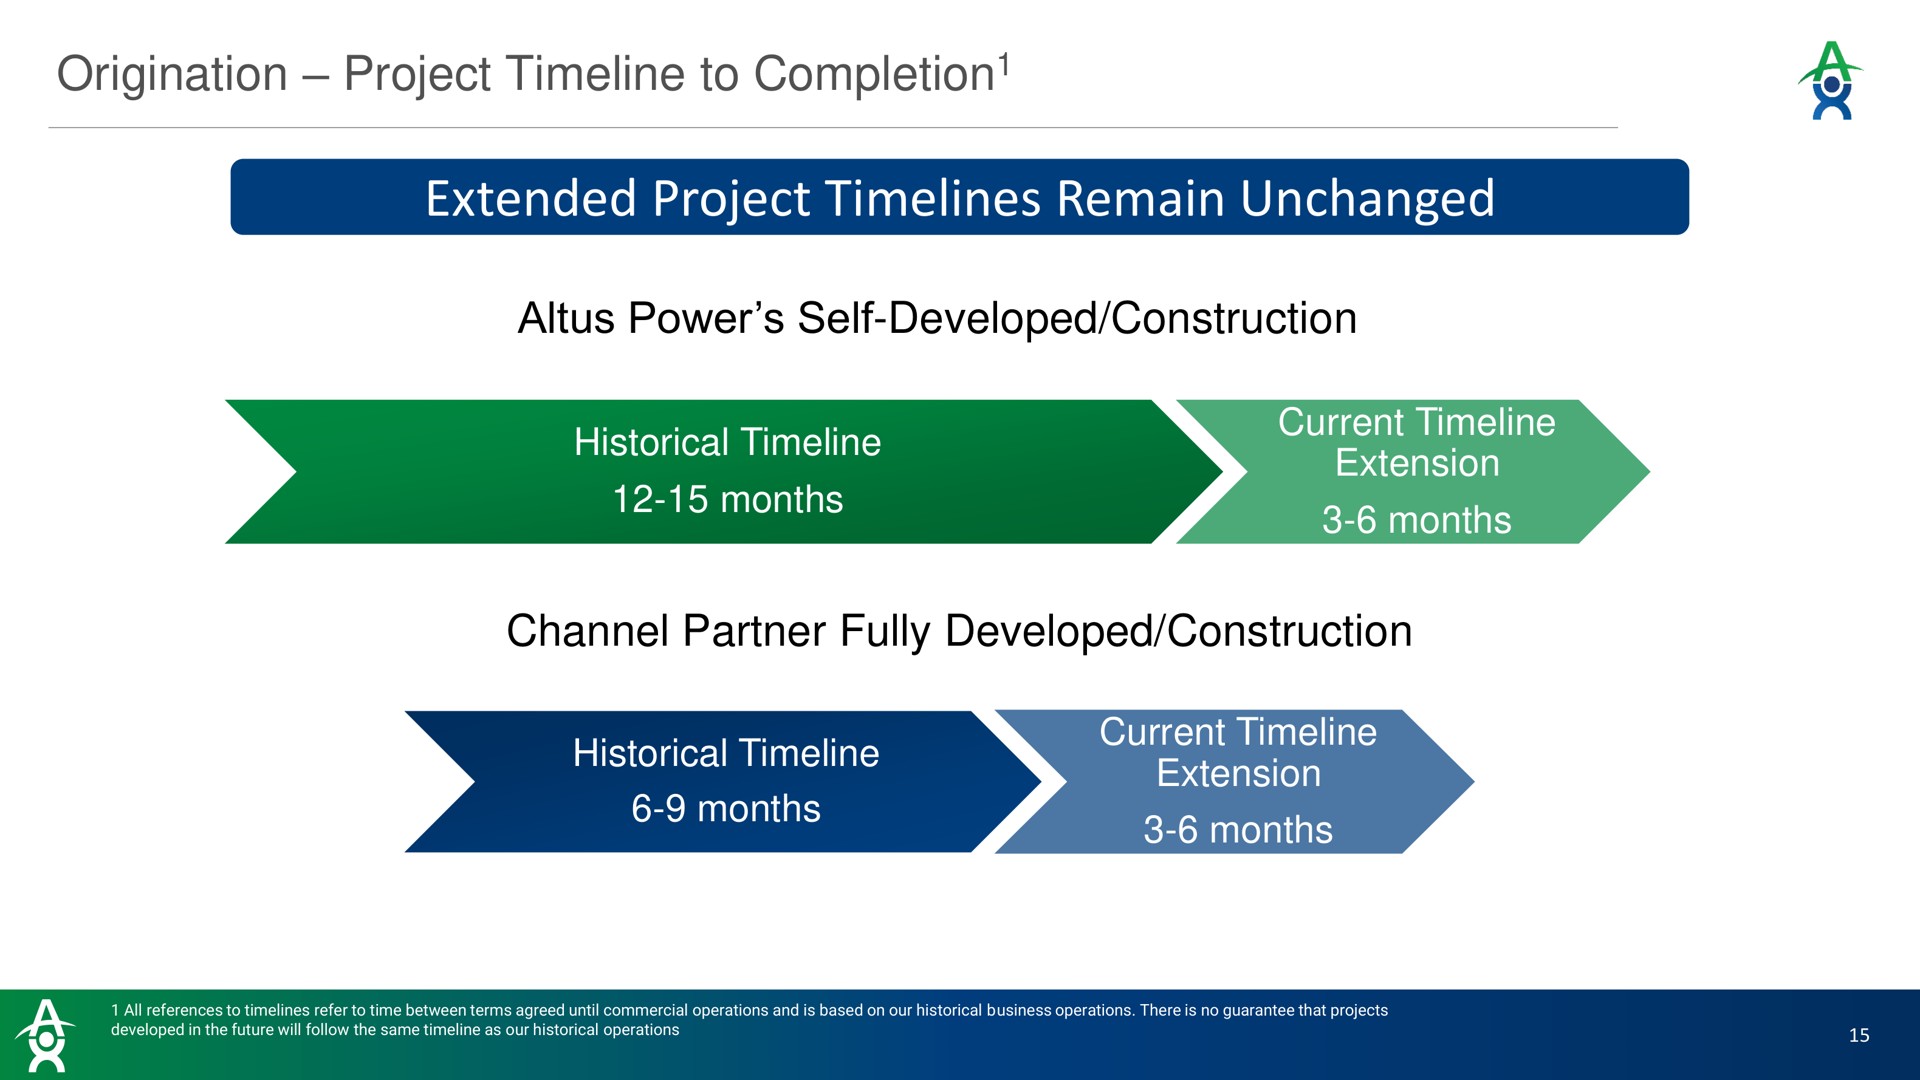 origination project to completion extended project remain unchanged power self developed construction historical months current extension months channel partner fully developed construction historical months current extension months completion | Altus Power